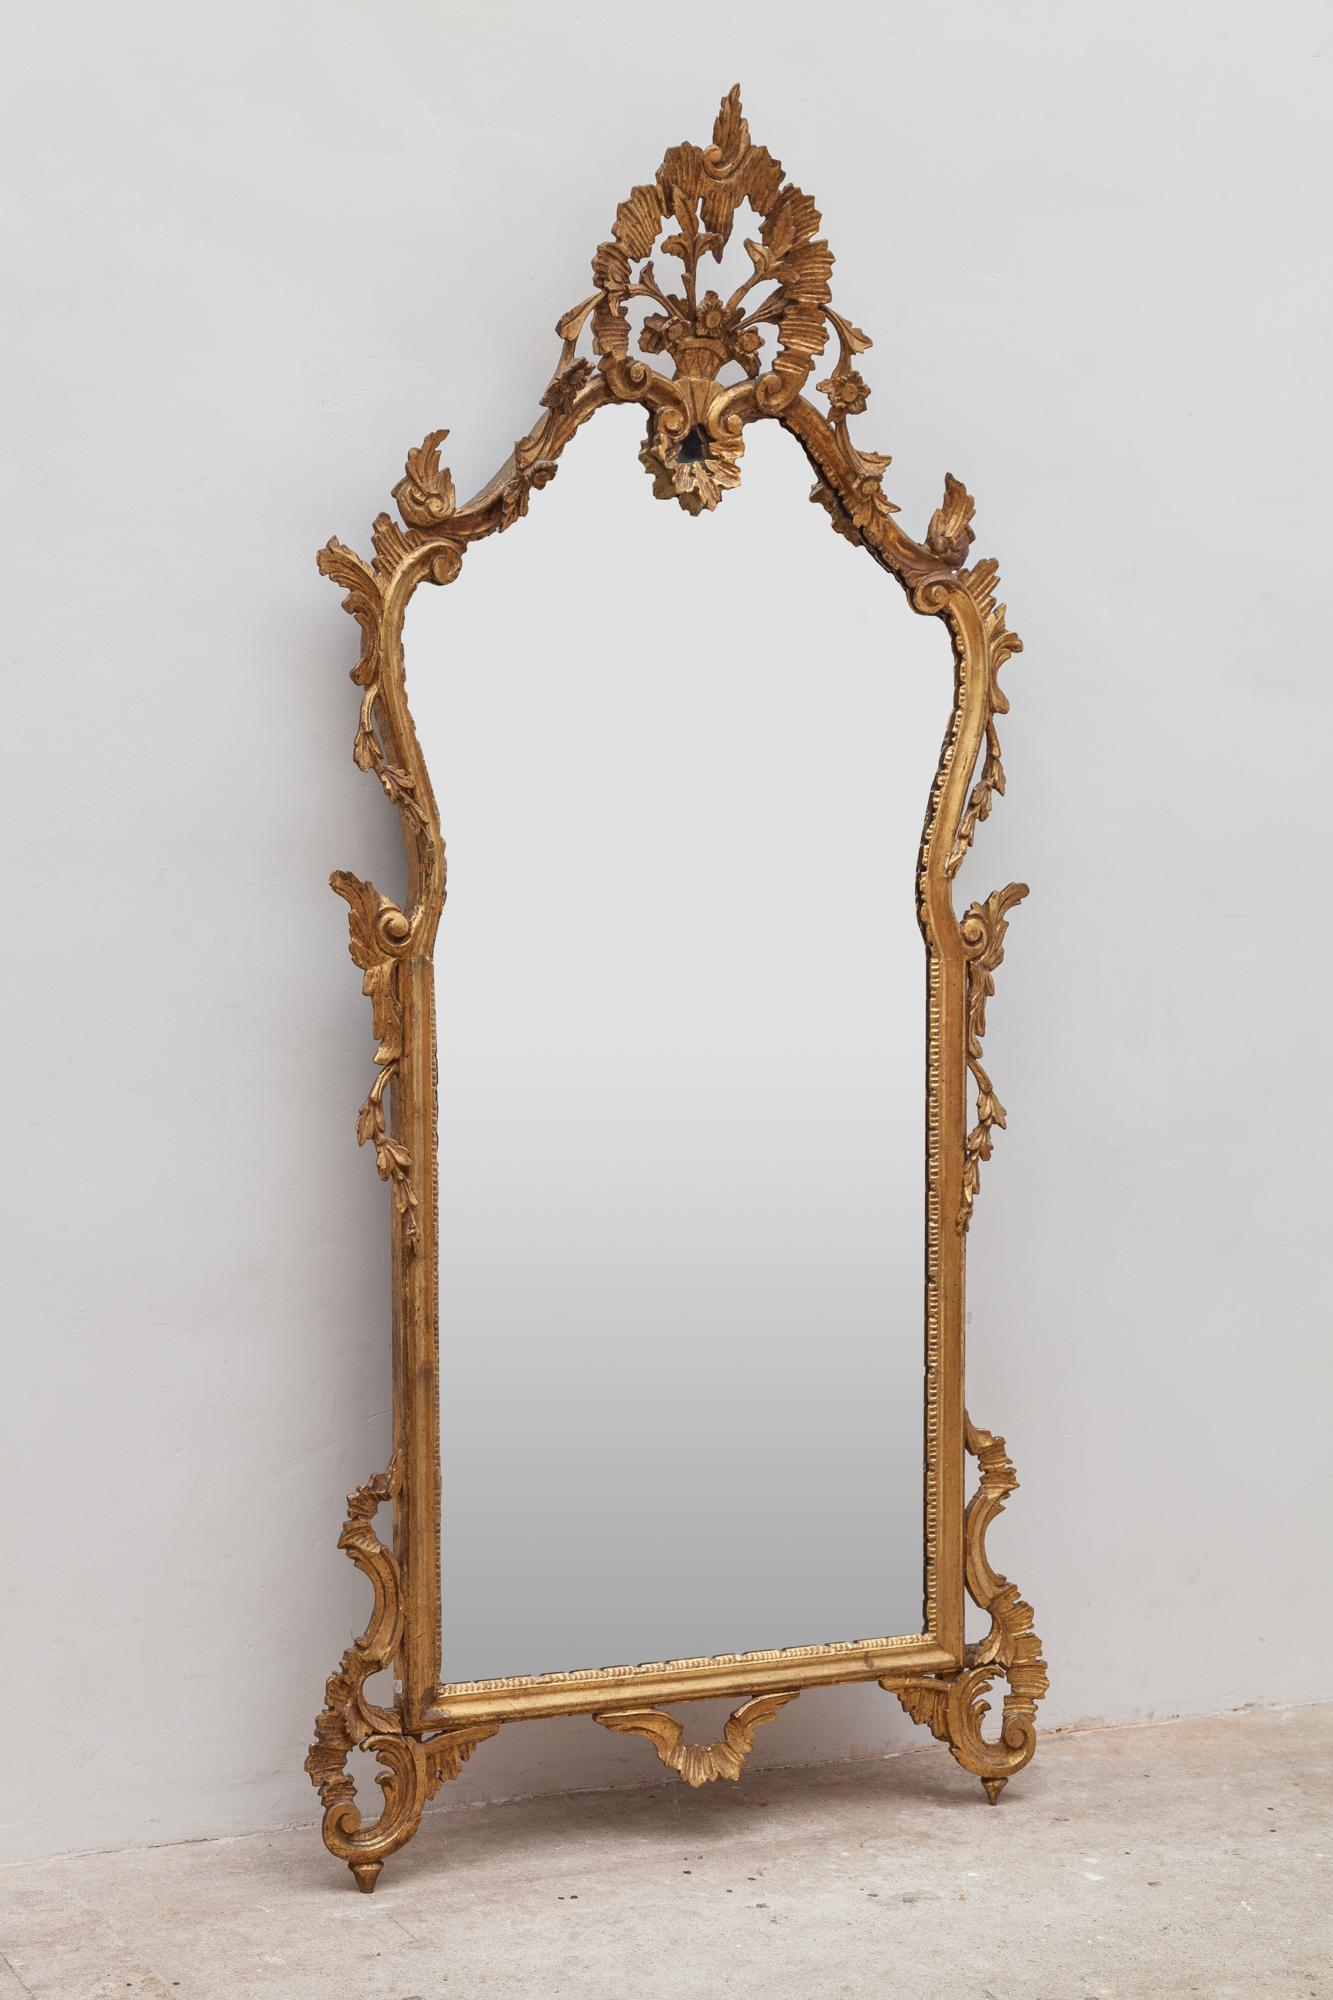 19th century mirror in Rococo style, gold-tone frame depicting a basket of flowers. The mirror is in excellent condition with no scratches on the glass.
French 1860s Rococo Revival Mirror will brighten up any space beautifully. Dimension: Height